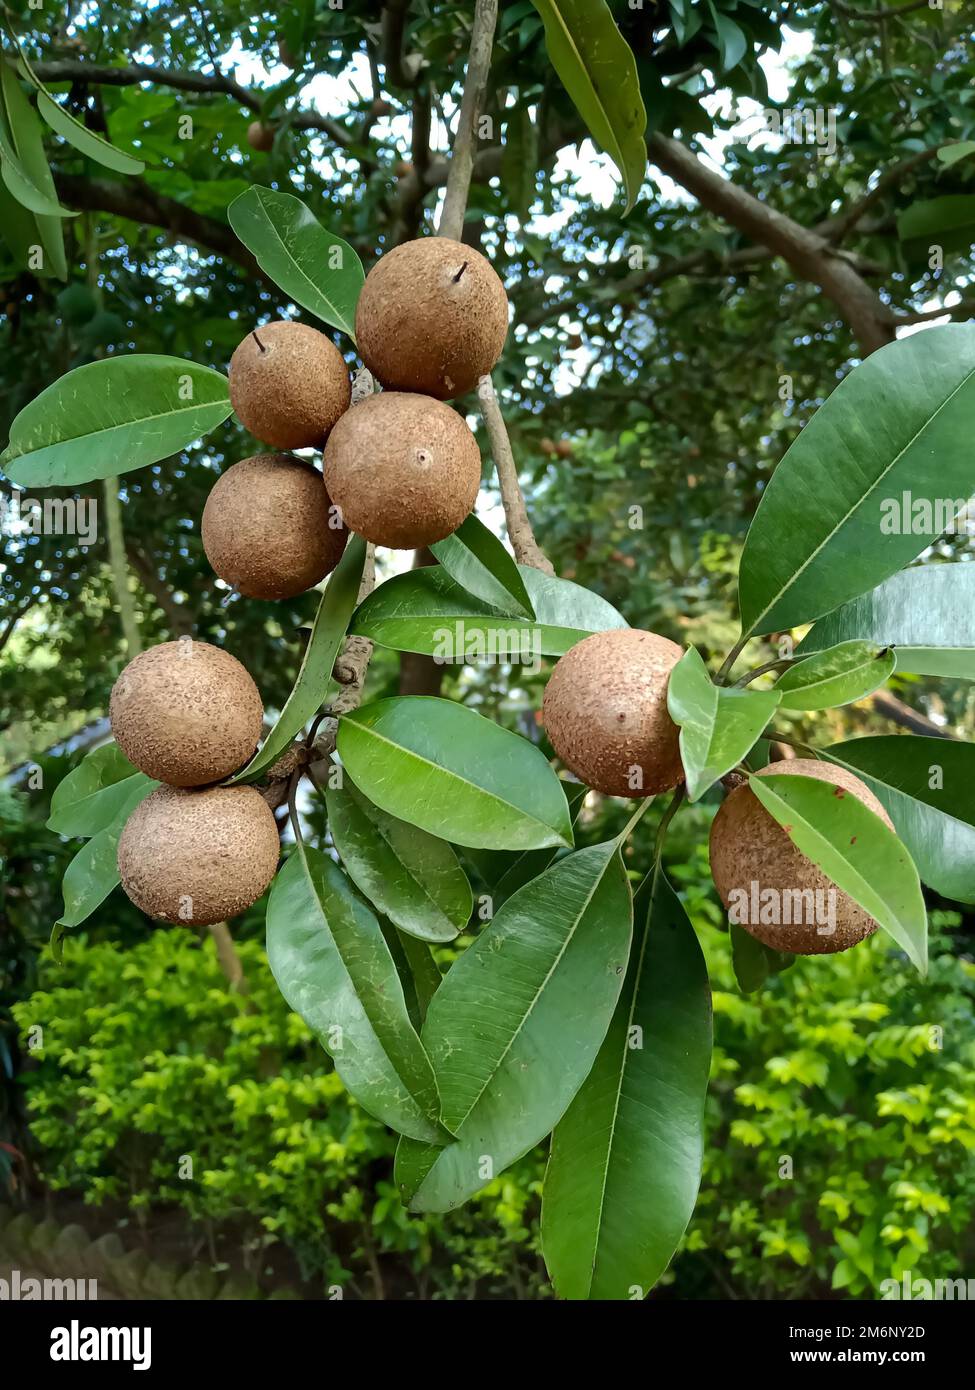 Chiku fruits tree in Indian agriculture Stock Photo